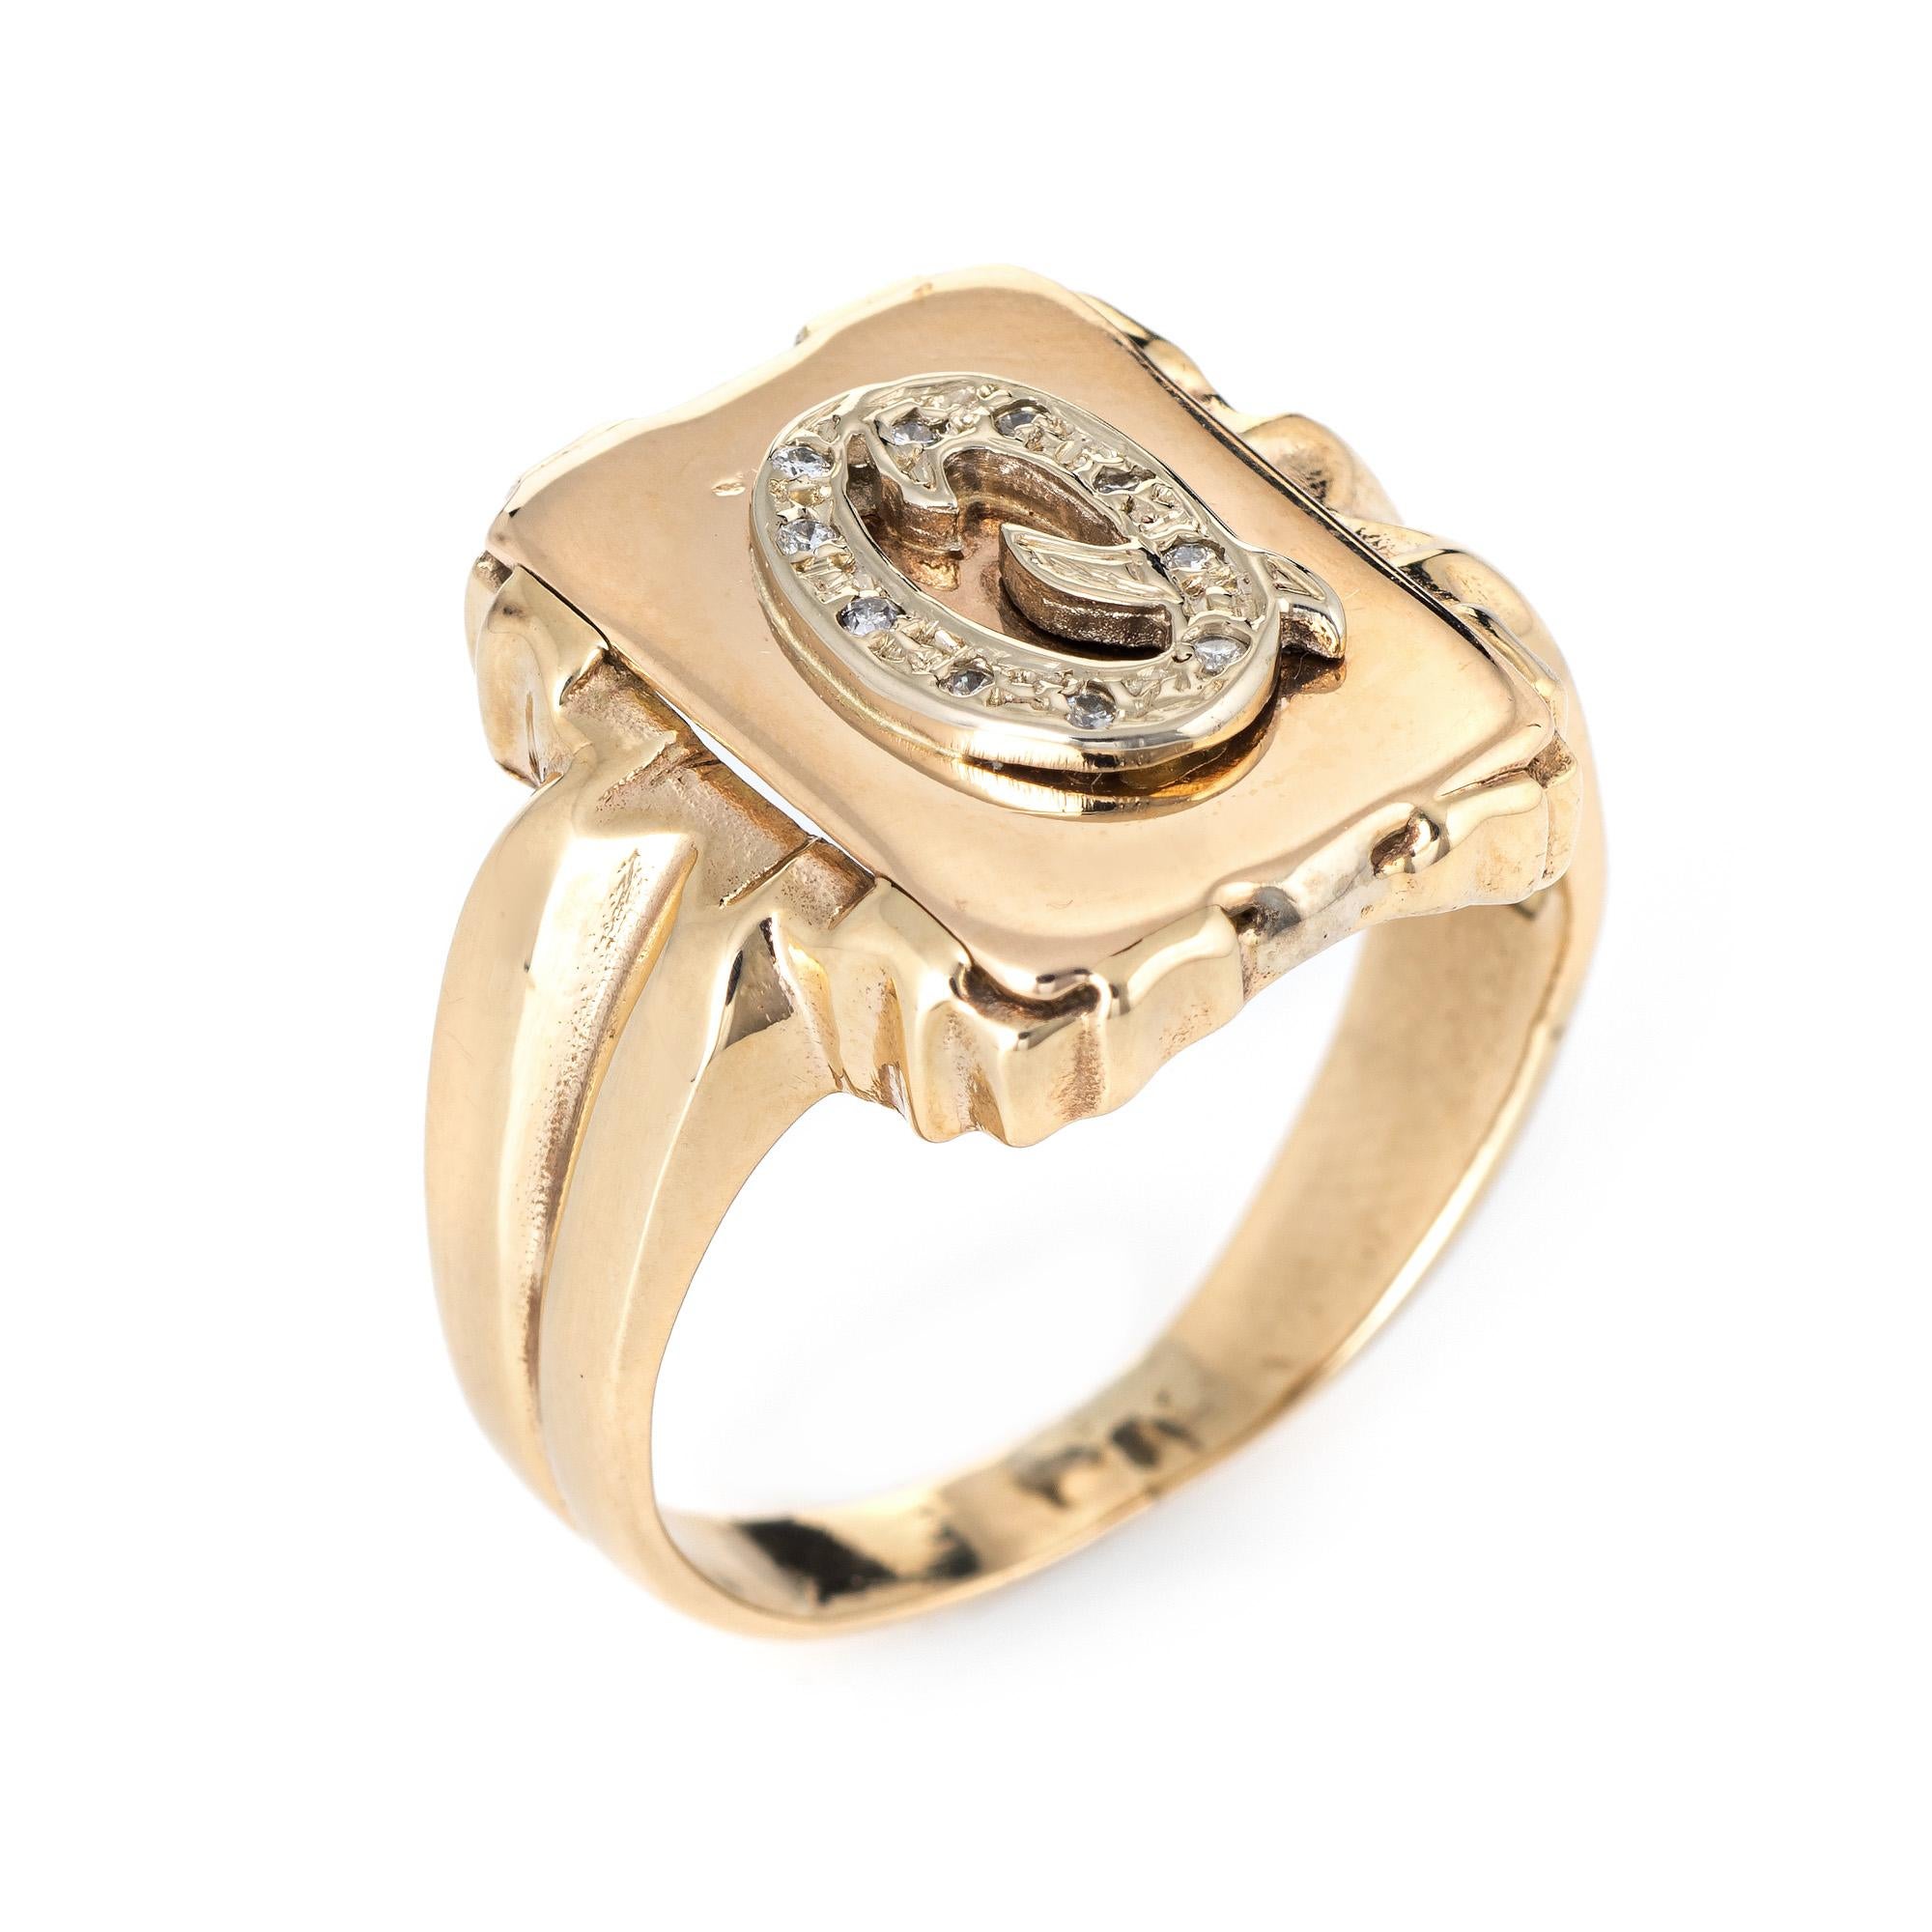 Stylish vintage letter Q initial diamond signet ring (circa 1960s to 1970s) crafted in 14 karat yellow gold. 

Diamonds total an estimated 0.10 carats (estimated at I-J color and I1 clarity). 

The square signet ring is crafted in a north-west